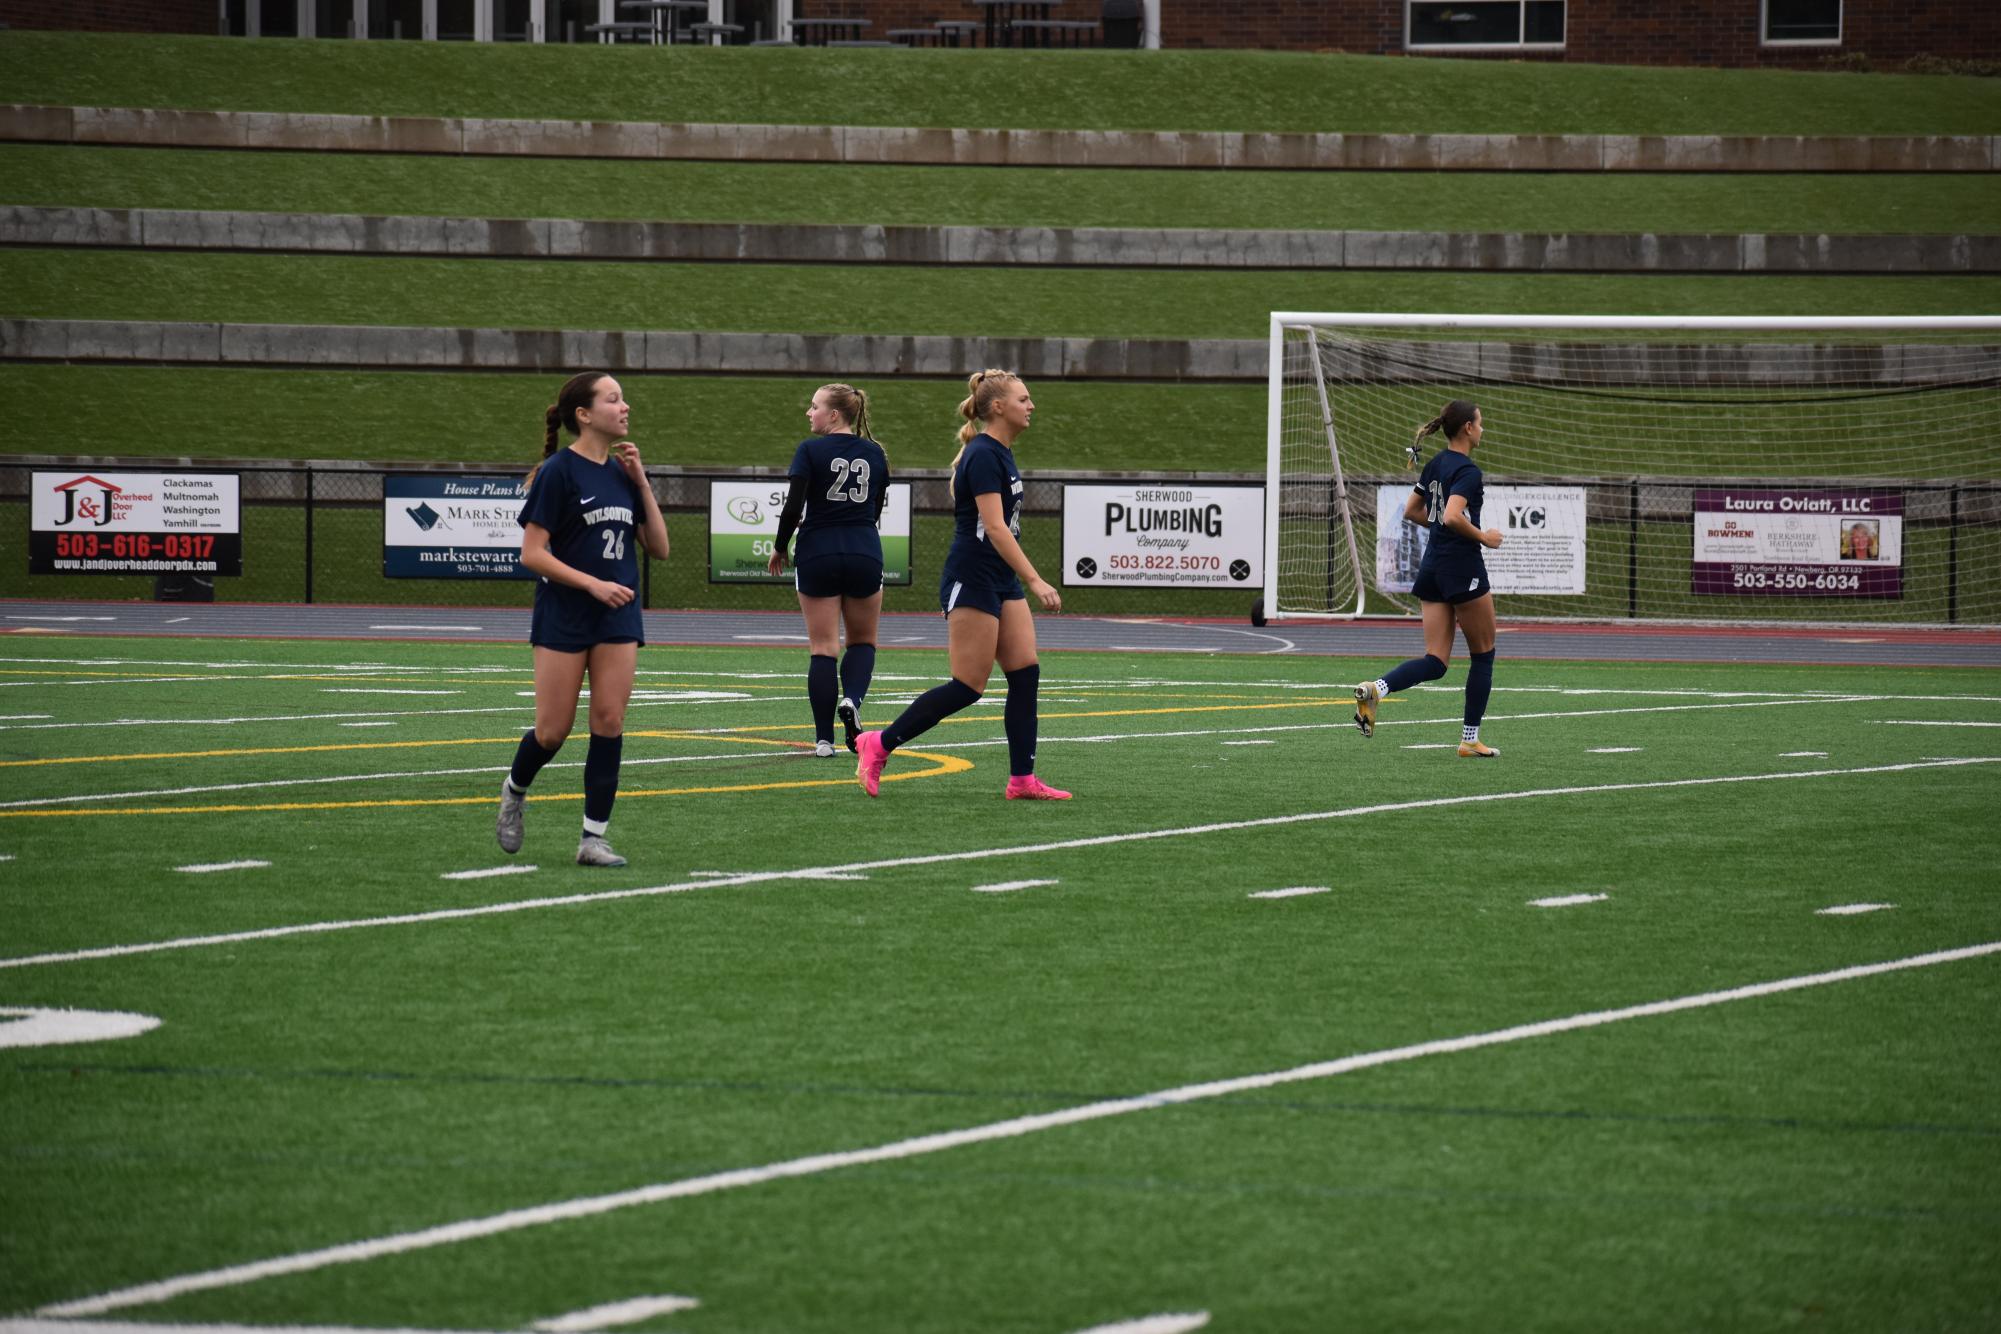 Led by Senior Captain Campbell Lawler, the defense takes the field. This group of girls were a force to be reckoned with throughout the 2023 season.